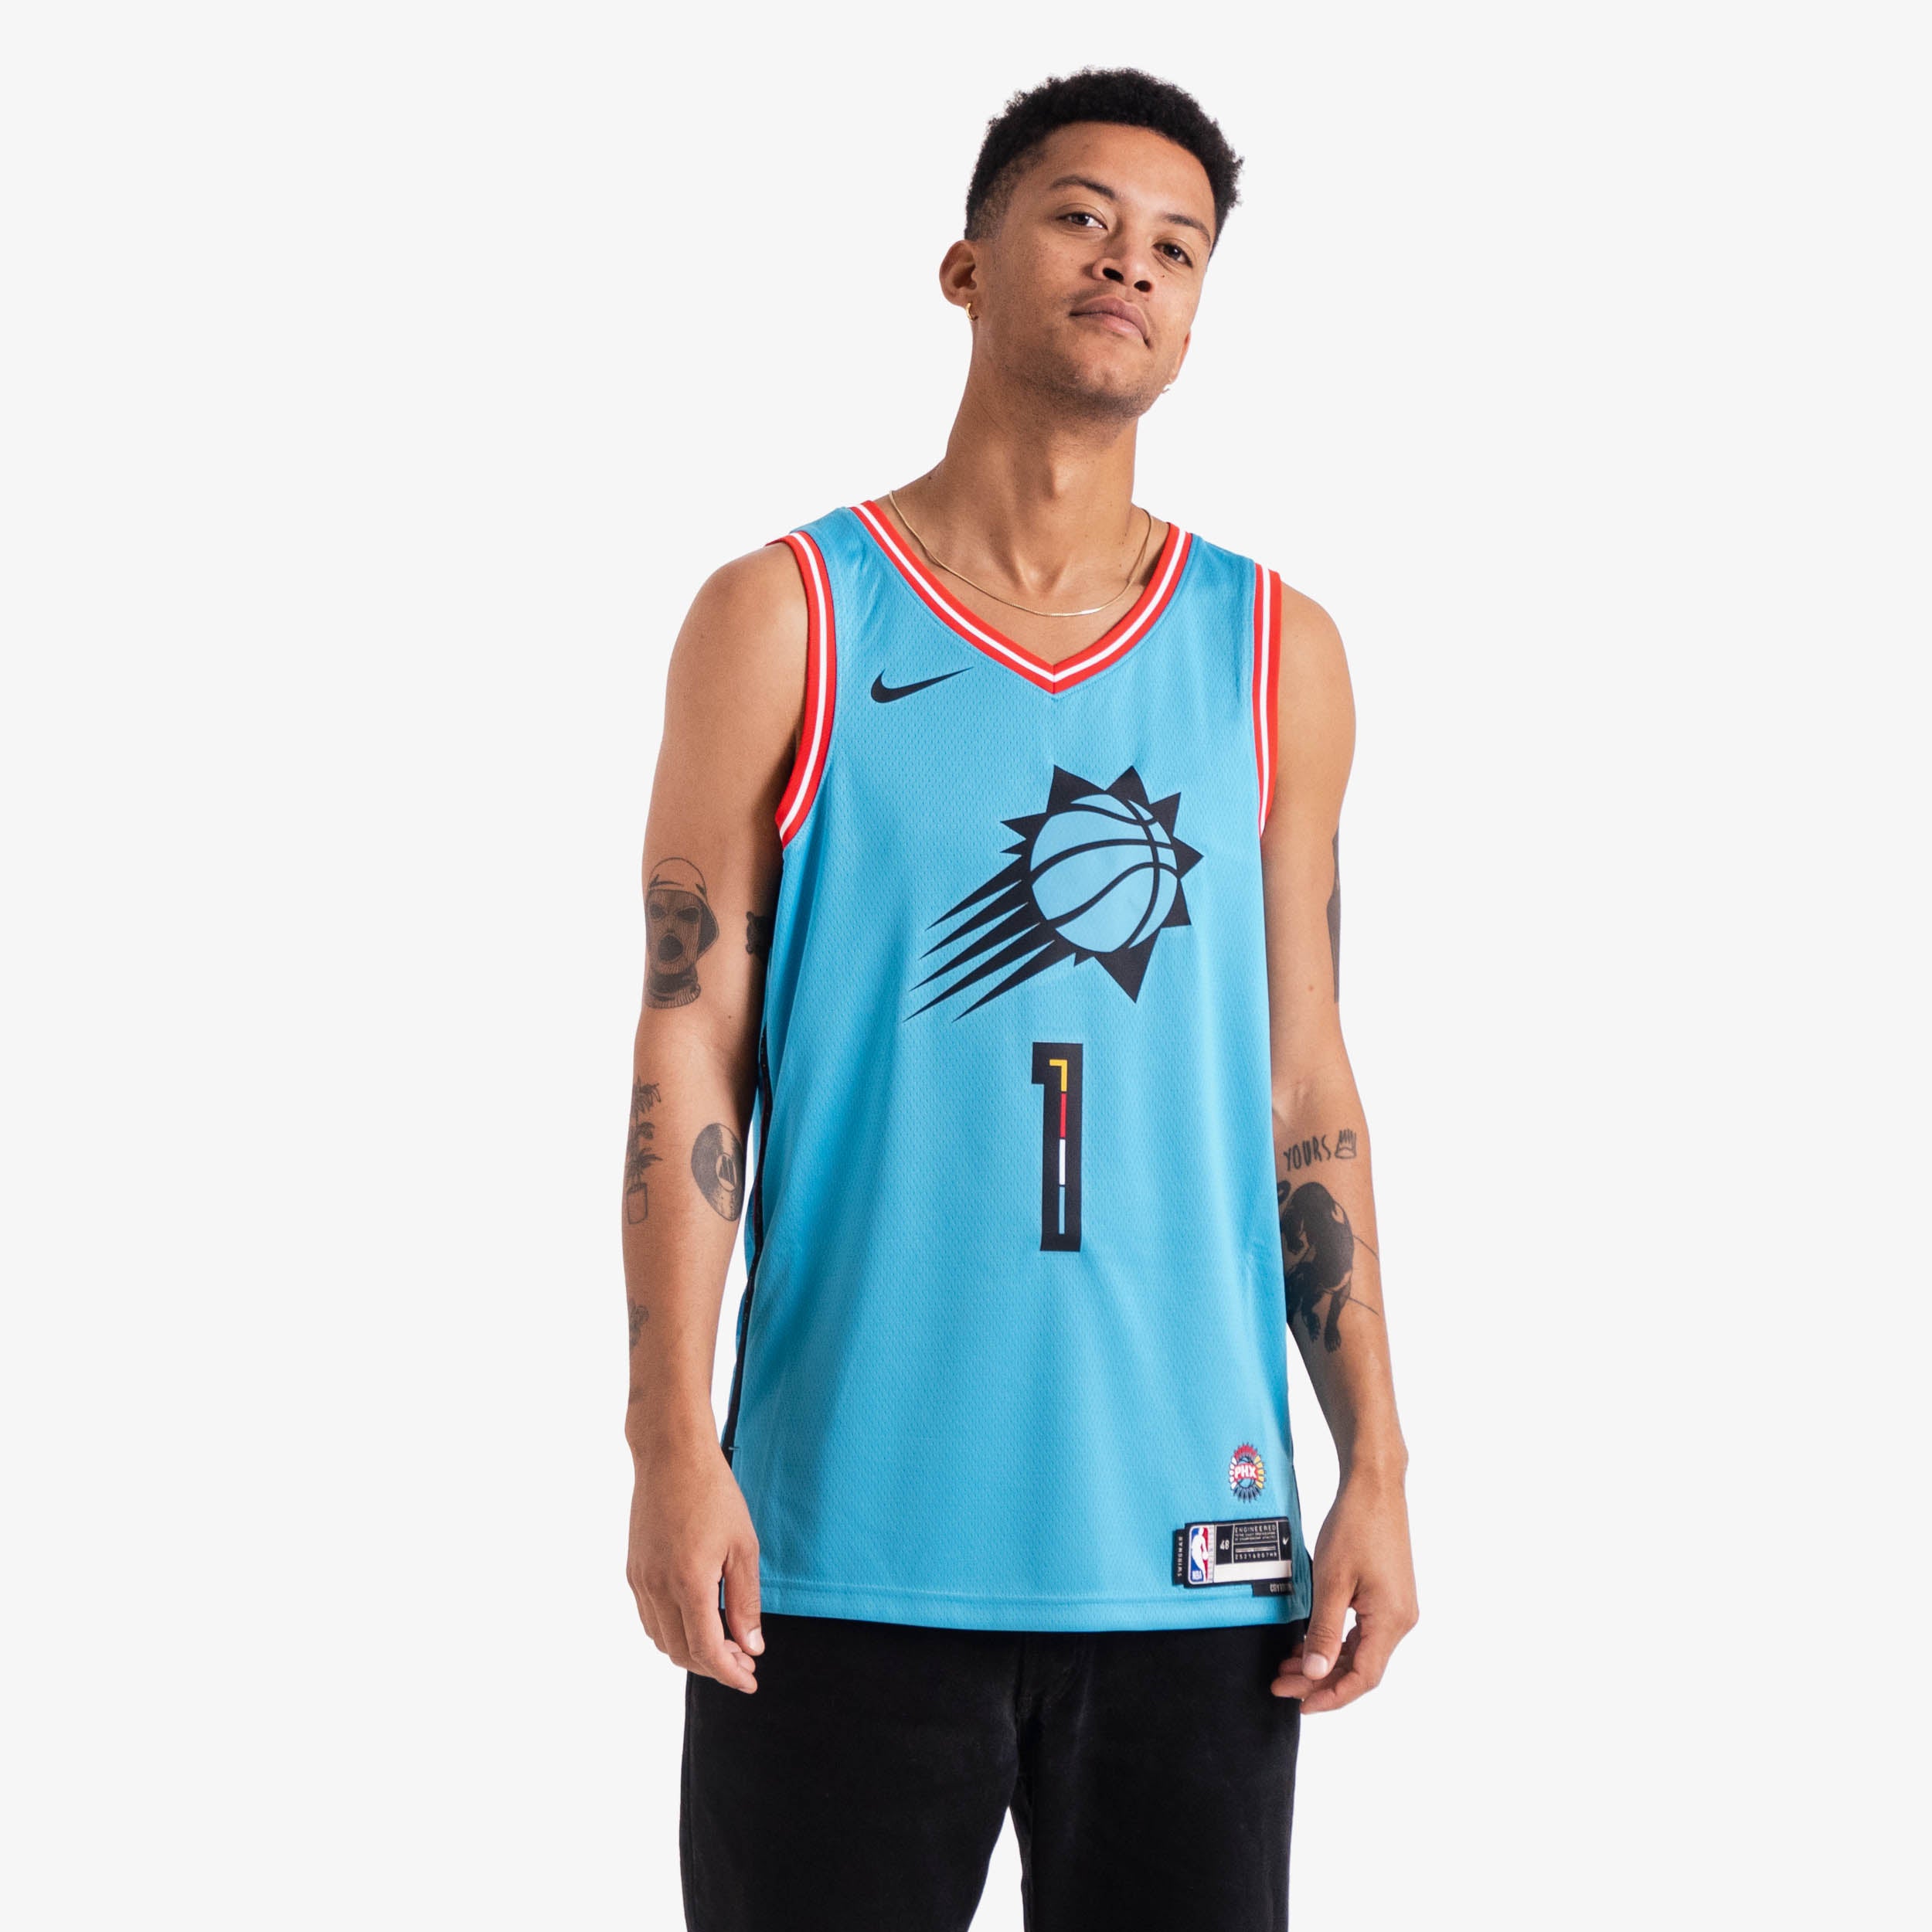 booker city edition jersey